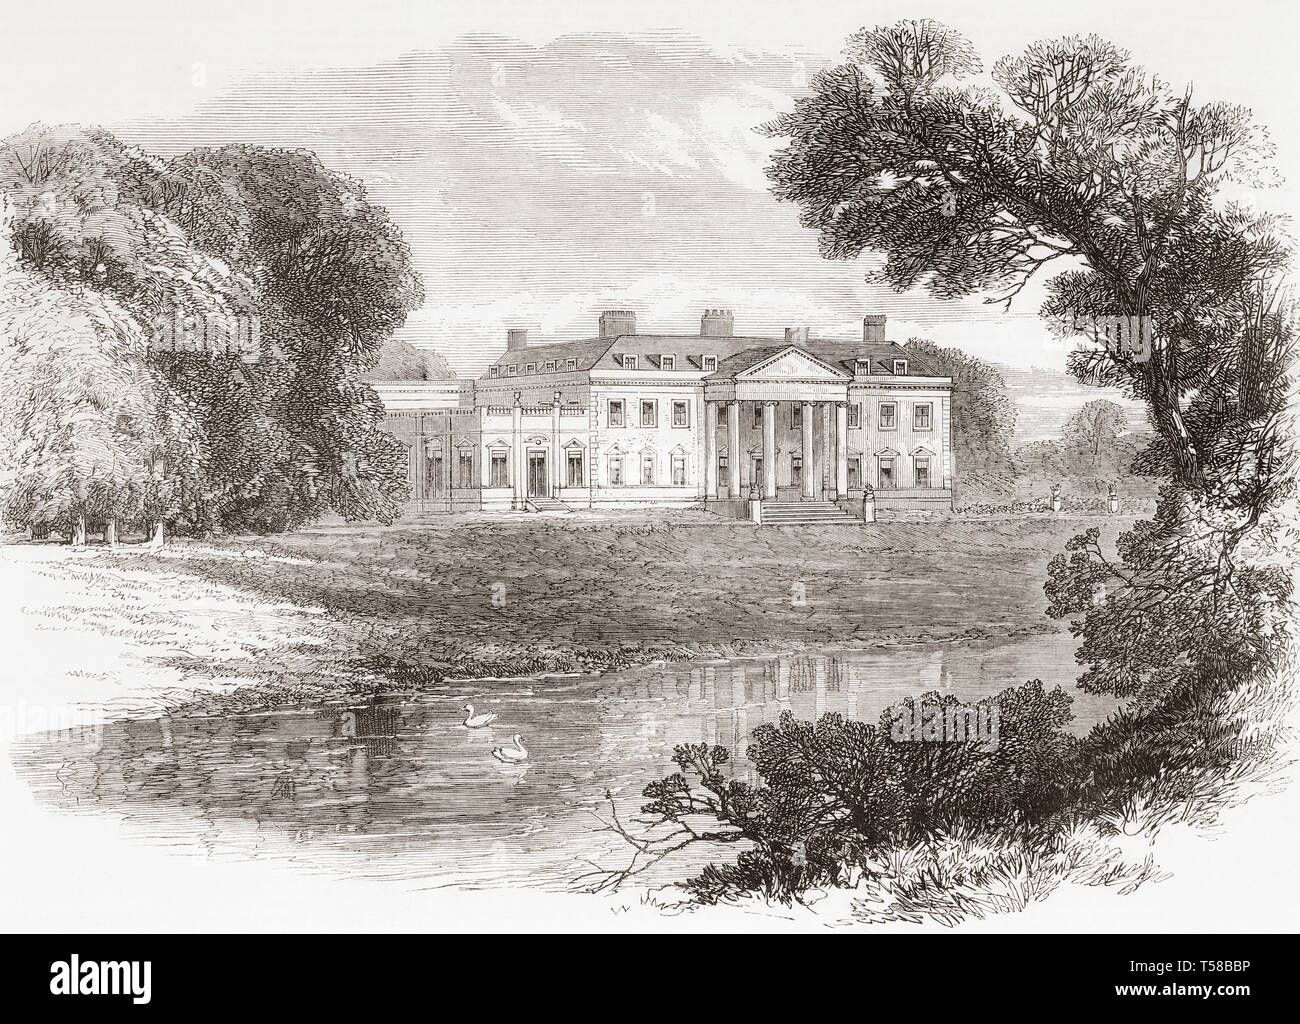 Broadlands, Romsey, Hampshire, England.  The country seat and birthplace of Lord Palmerston.  From The Illustrated London News, published 1865. Stock Photo